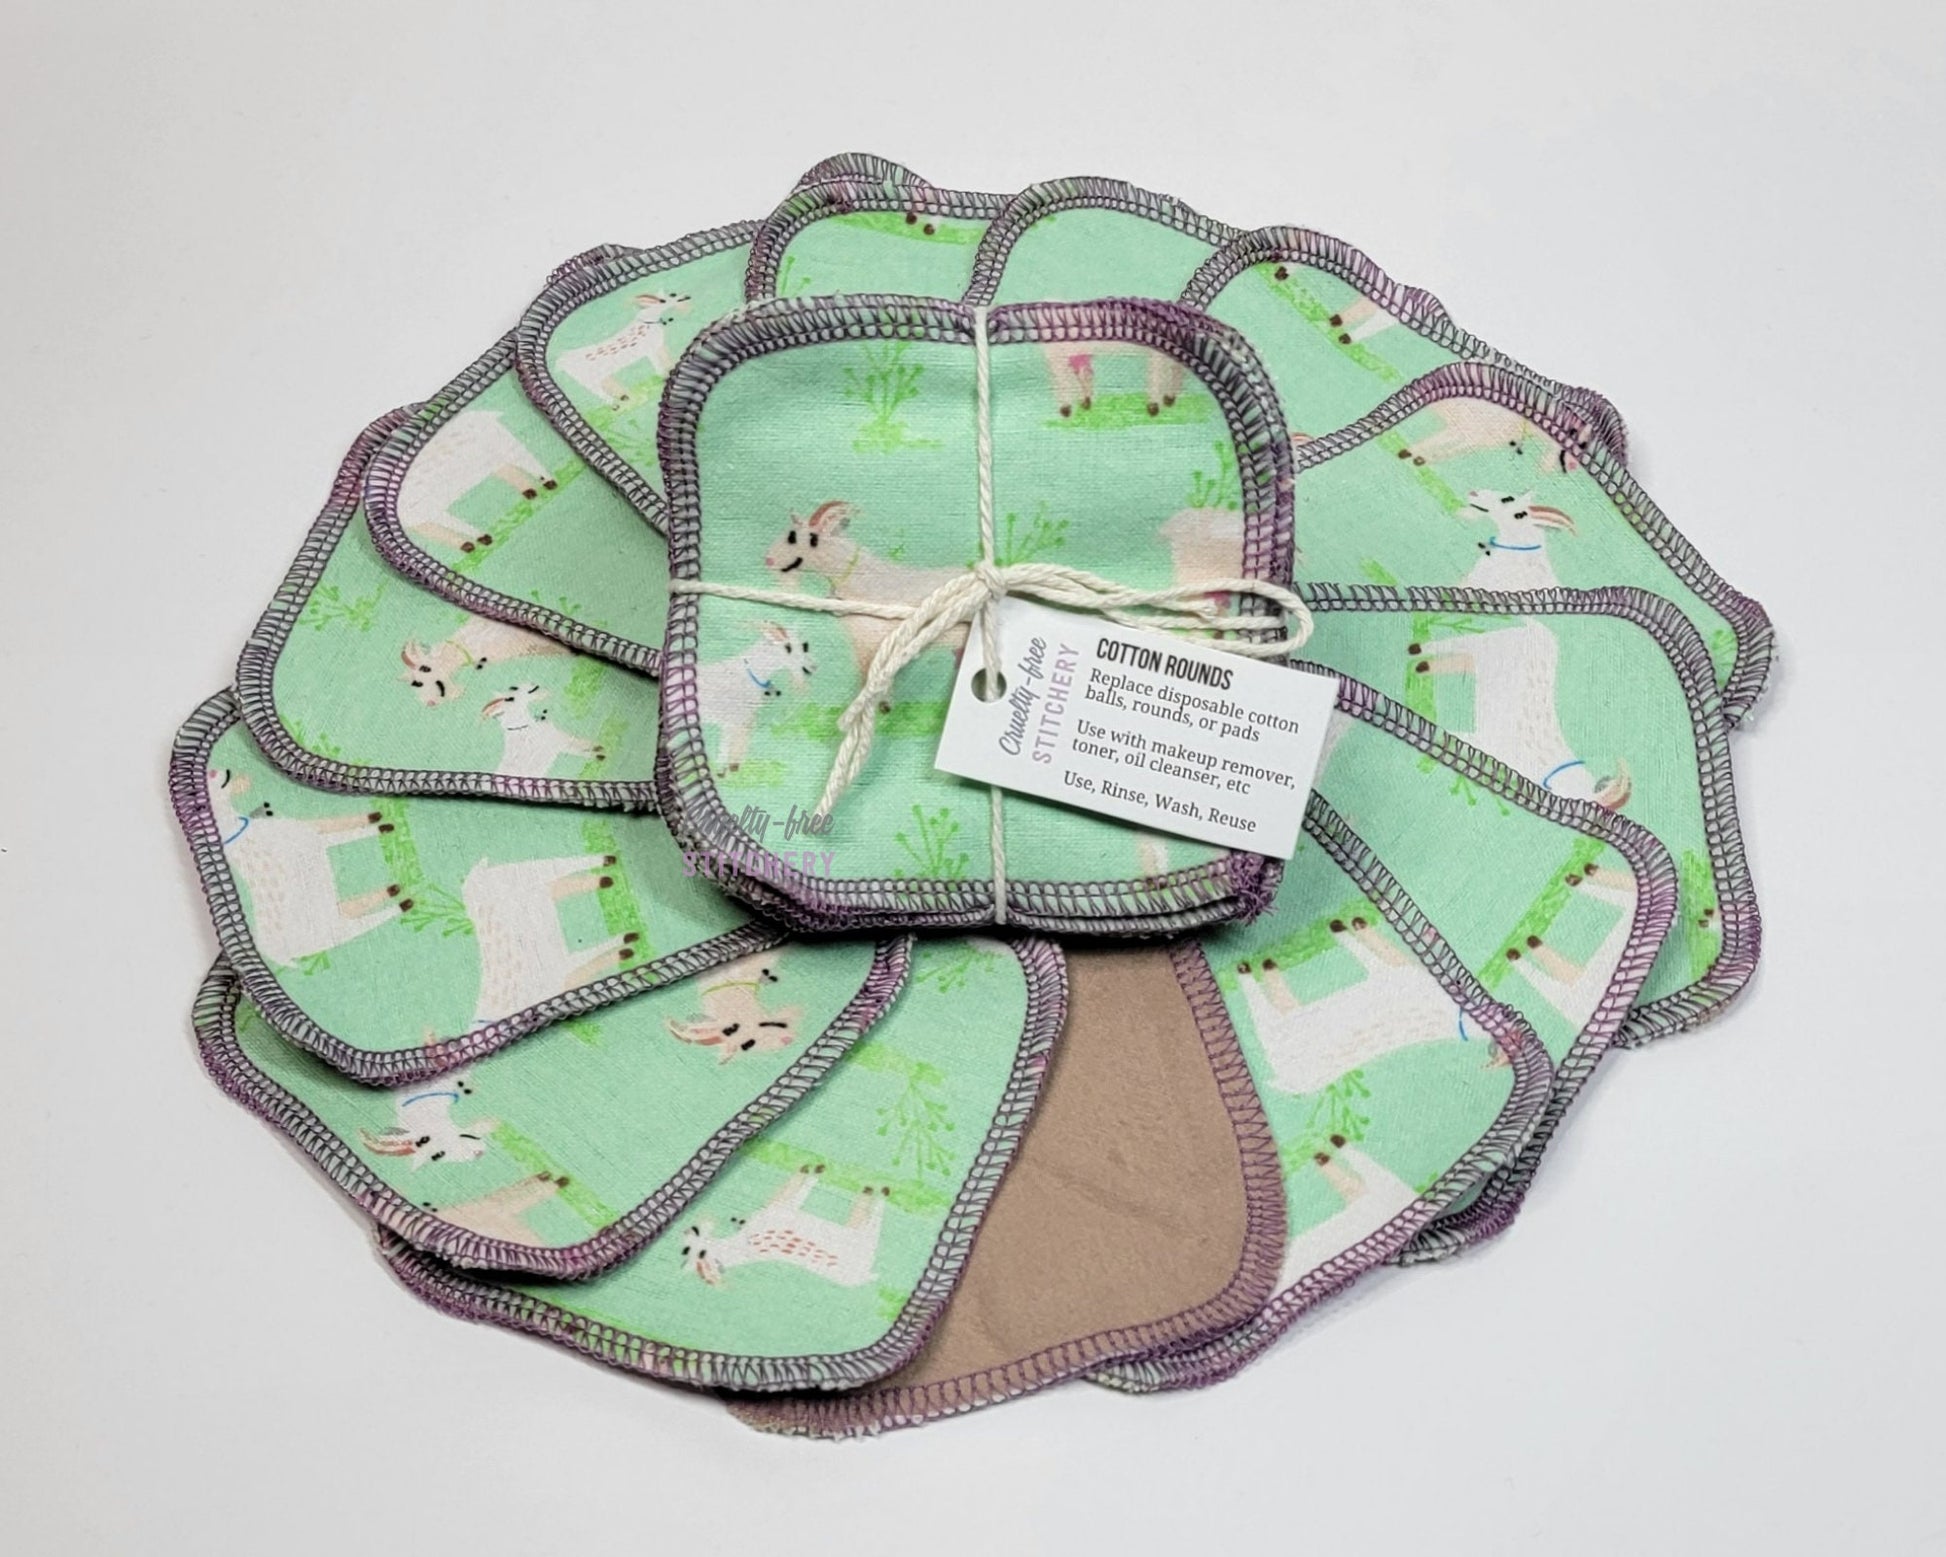 Light green with white goats print reusable cotton rounds. Arranged in a circle with a bundled pack in the center. One is flipped over to show a solid tan color on the back. They are a rounded square shape and stitched with light purple thread.